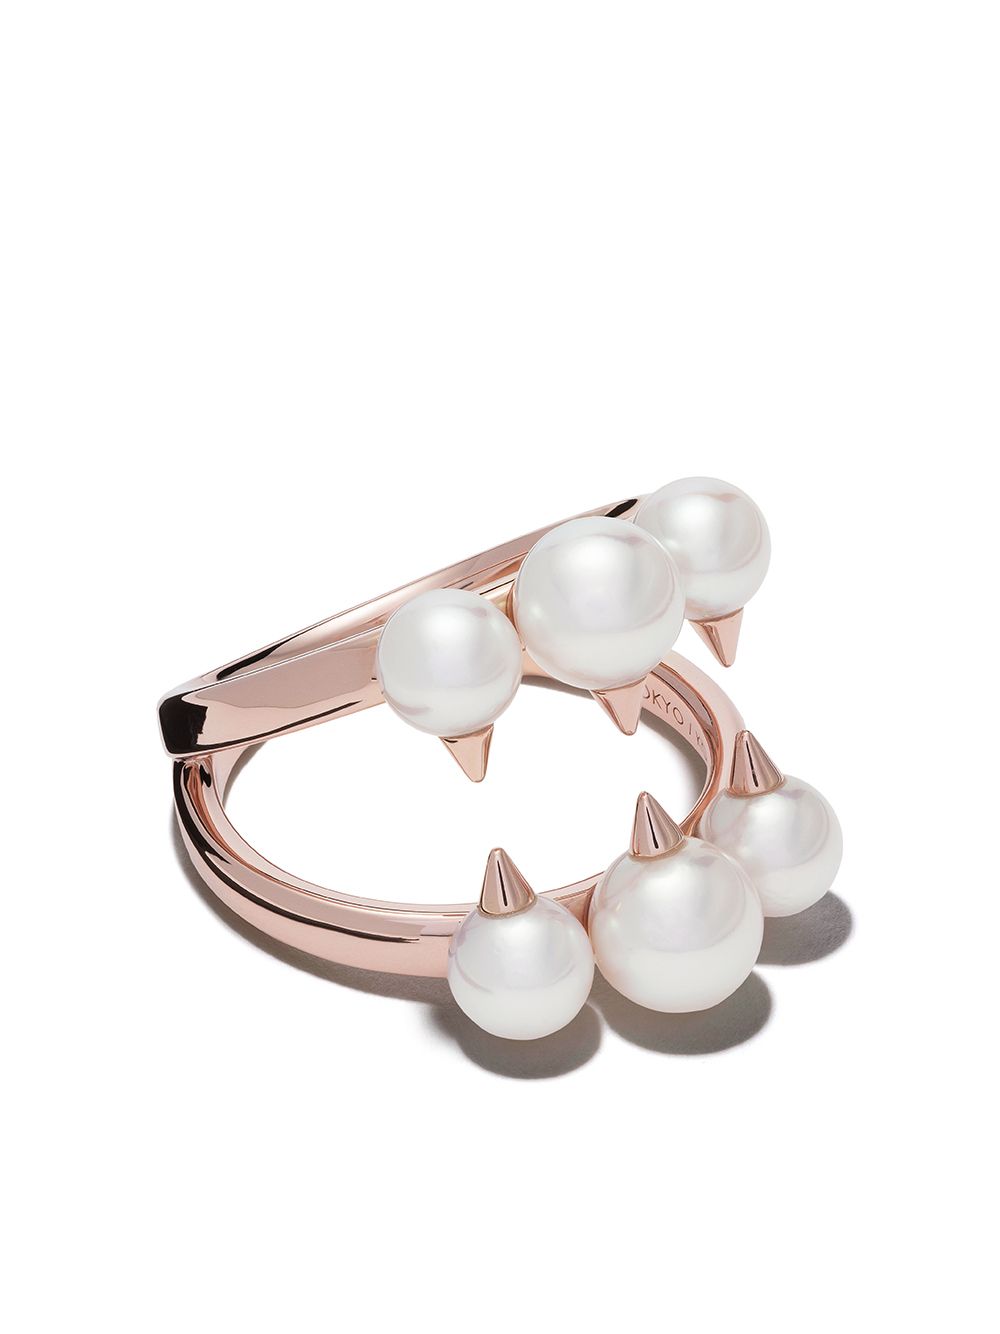 TASAKI - 18kt rose gold Collection Line Danger Signature ring - women - 18kt Rose Gold/Akoya Pearl - 5 1/2 - Unavailable